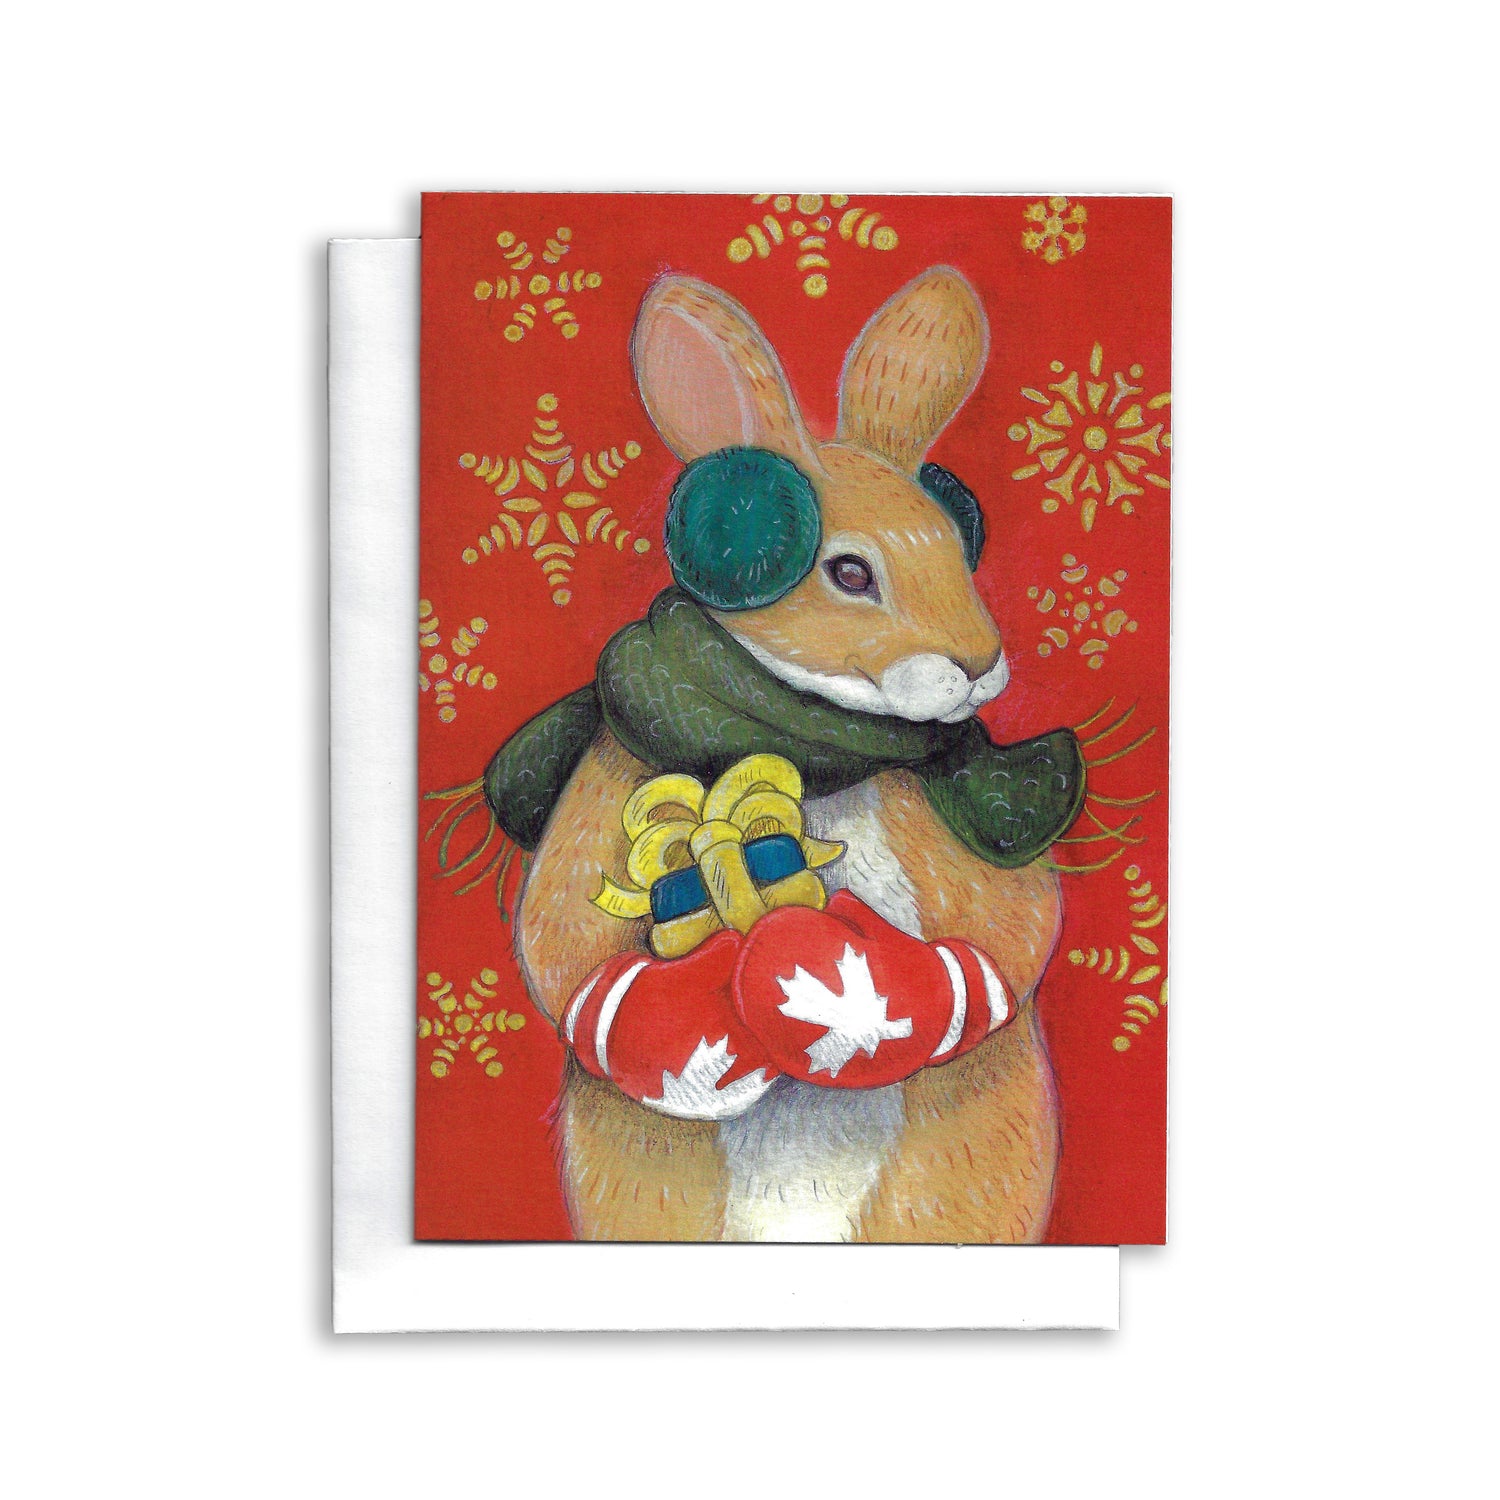 An illustrated Canadian Christmas Card of a rabbit holding a gift. He is wearing red mittens with white maple leaf on them. Red background with large gold snowflakes